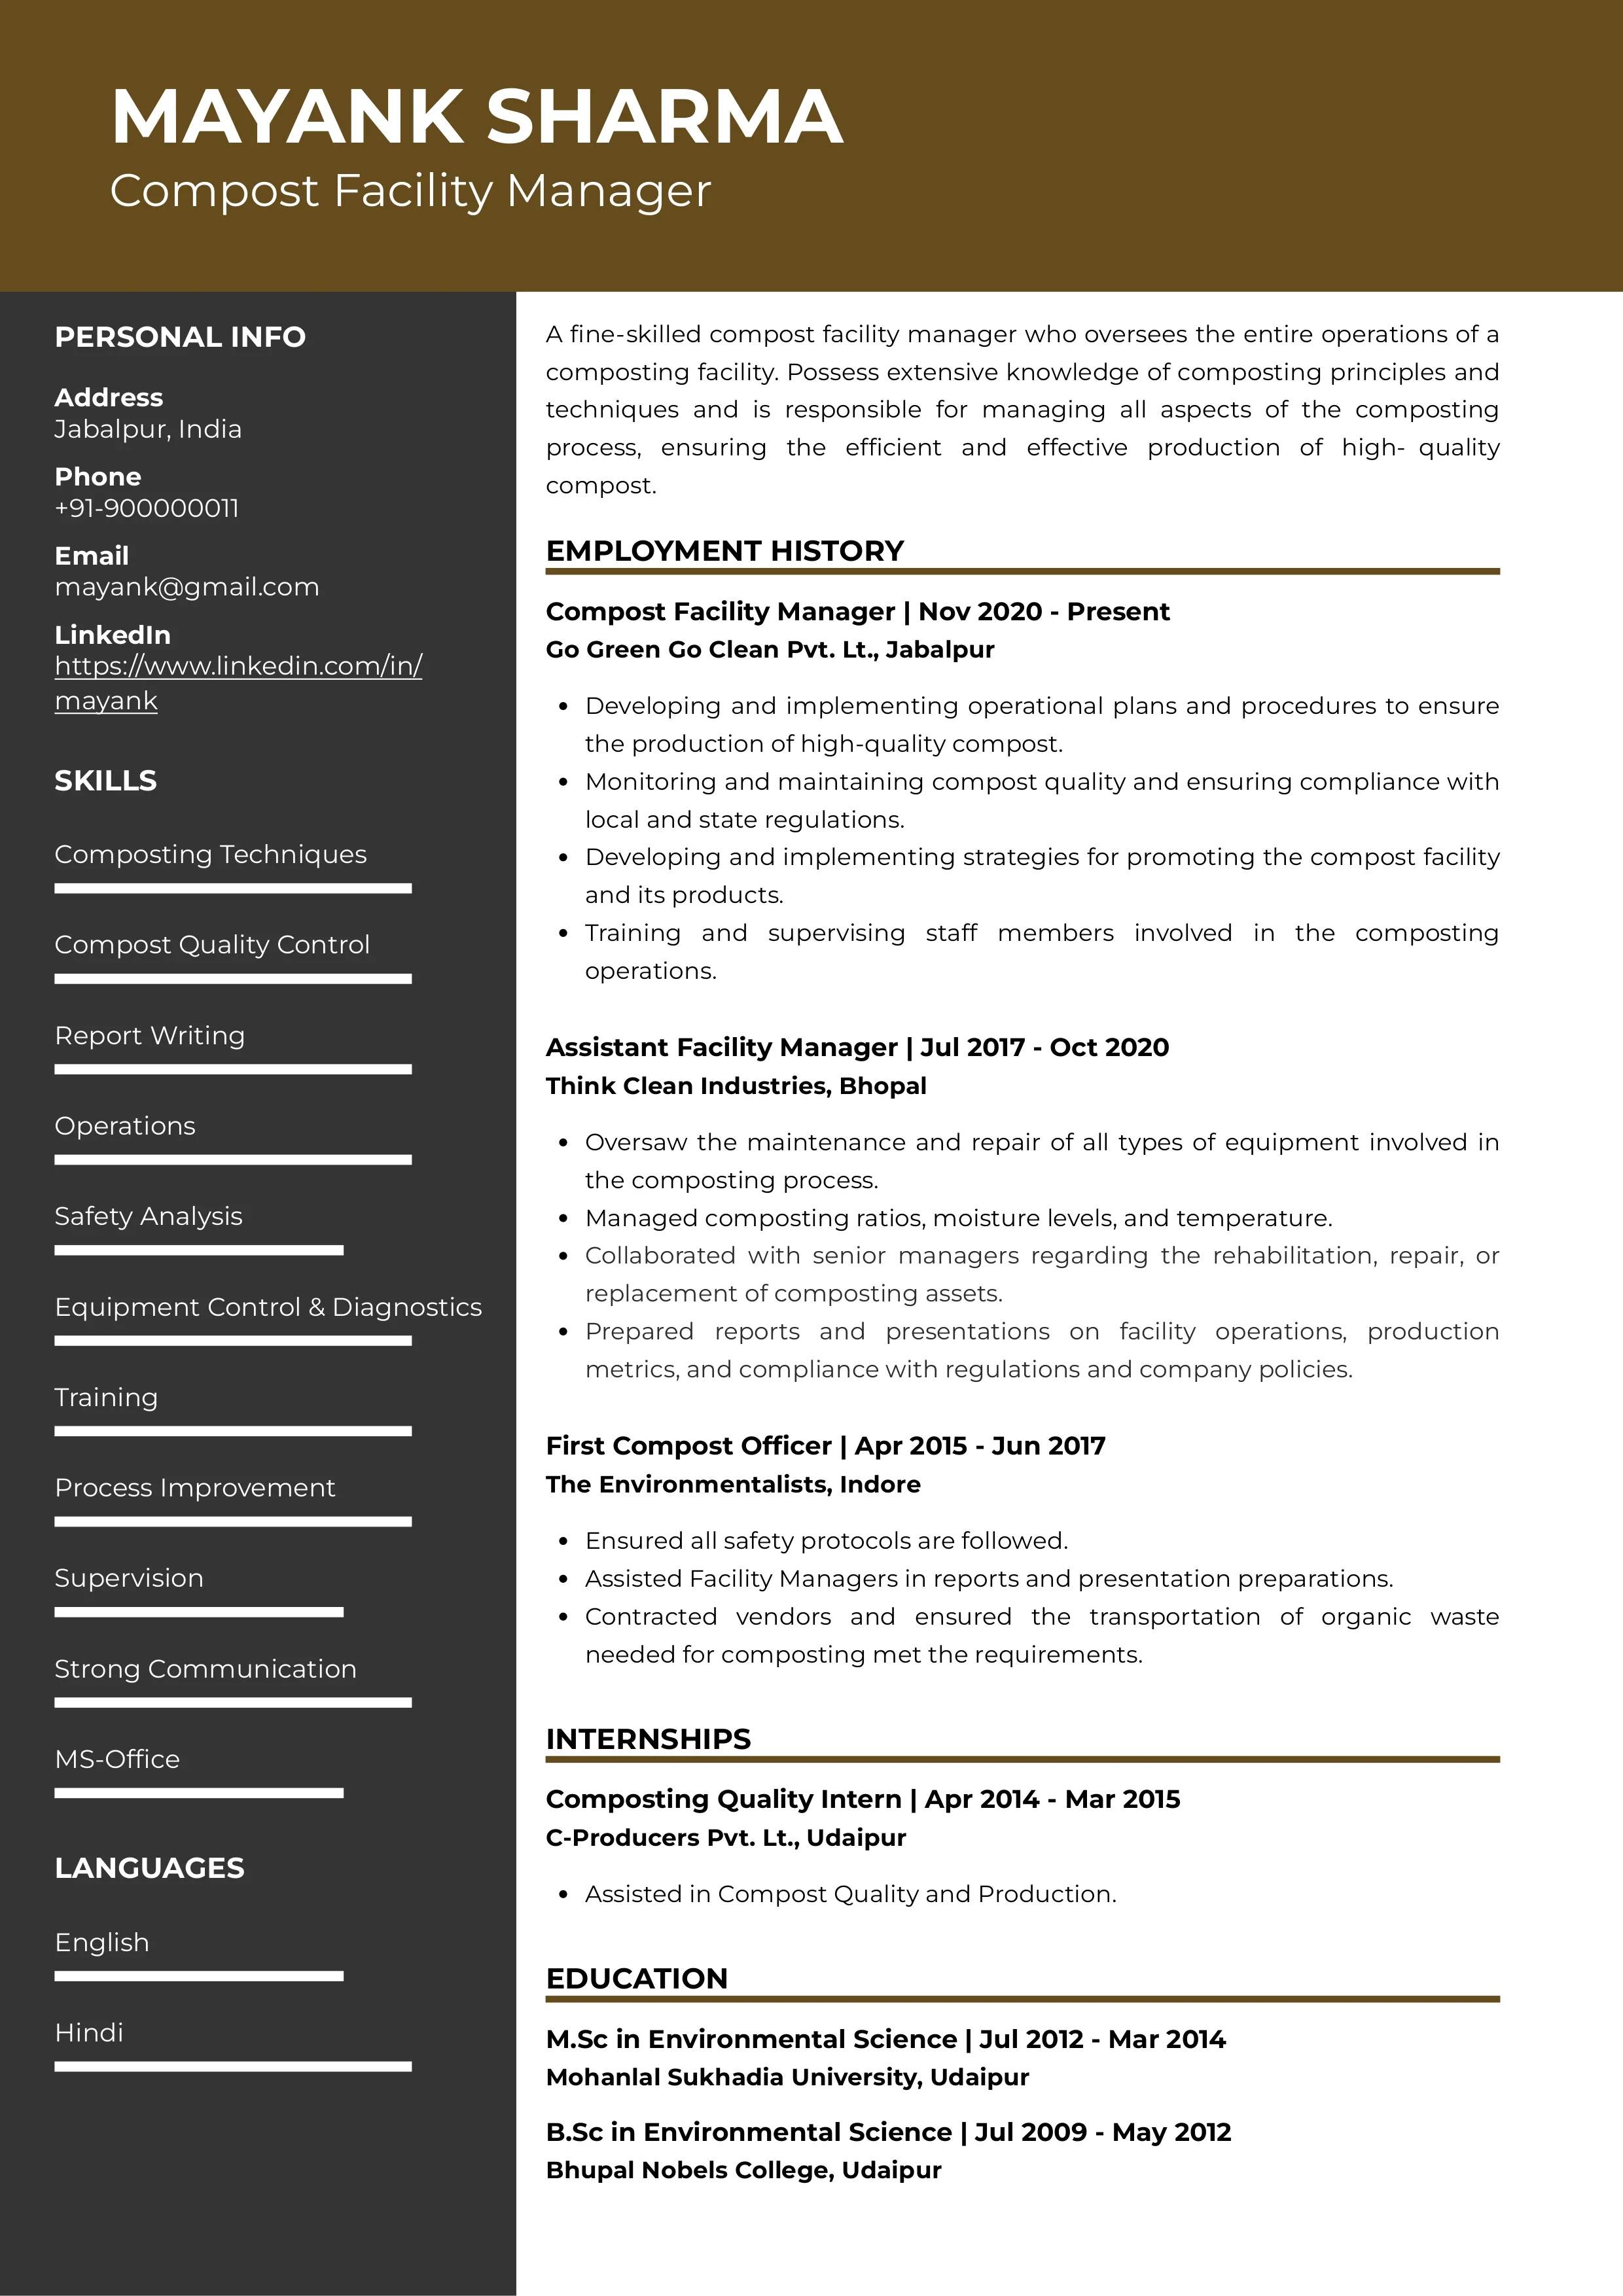 Sample Resume of Composting Facility Manager | Free Resume Templates & Samples on Resumod.co